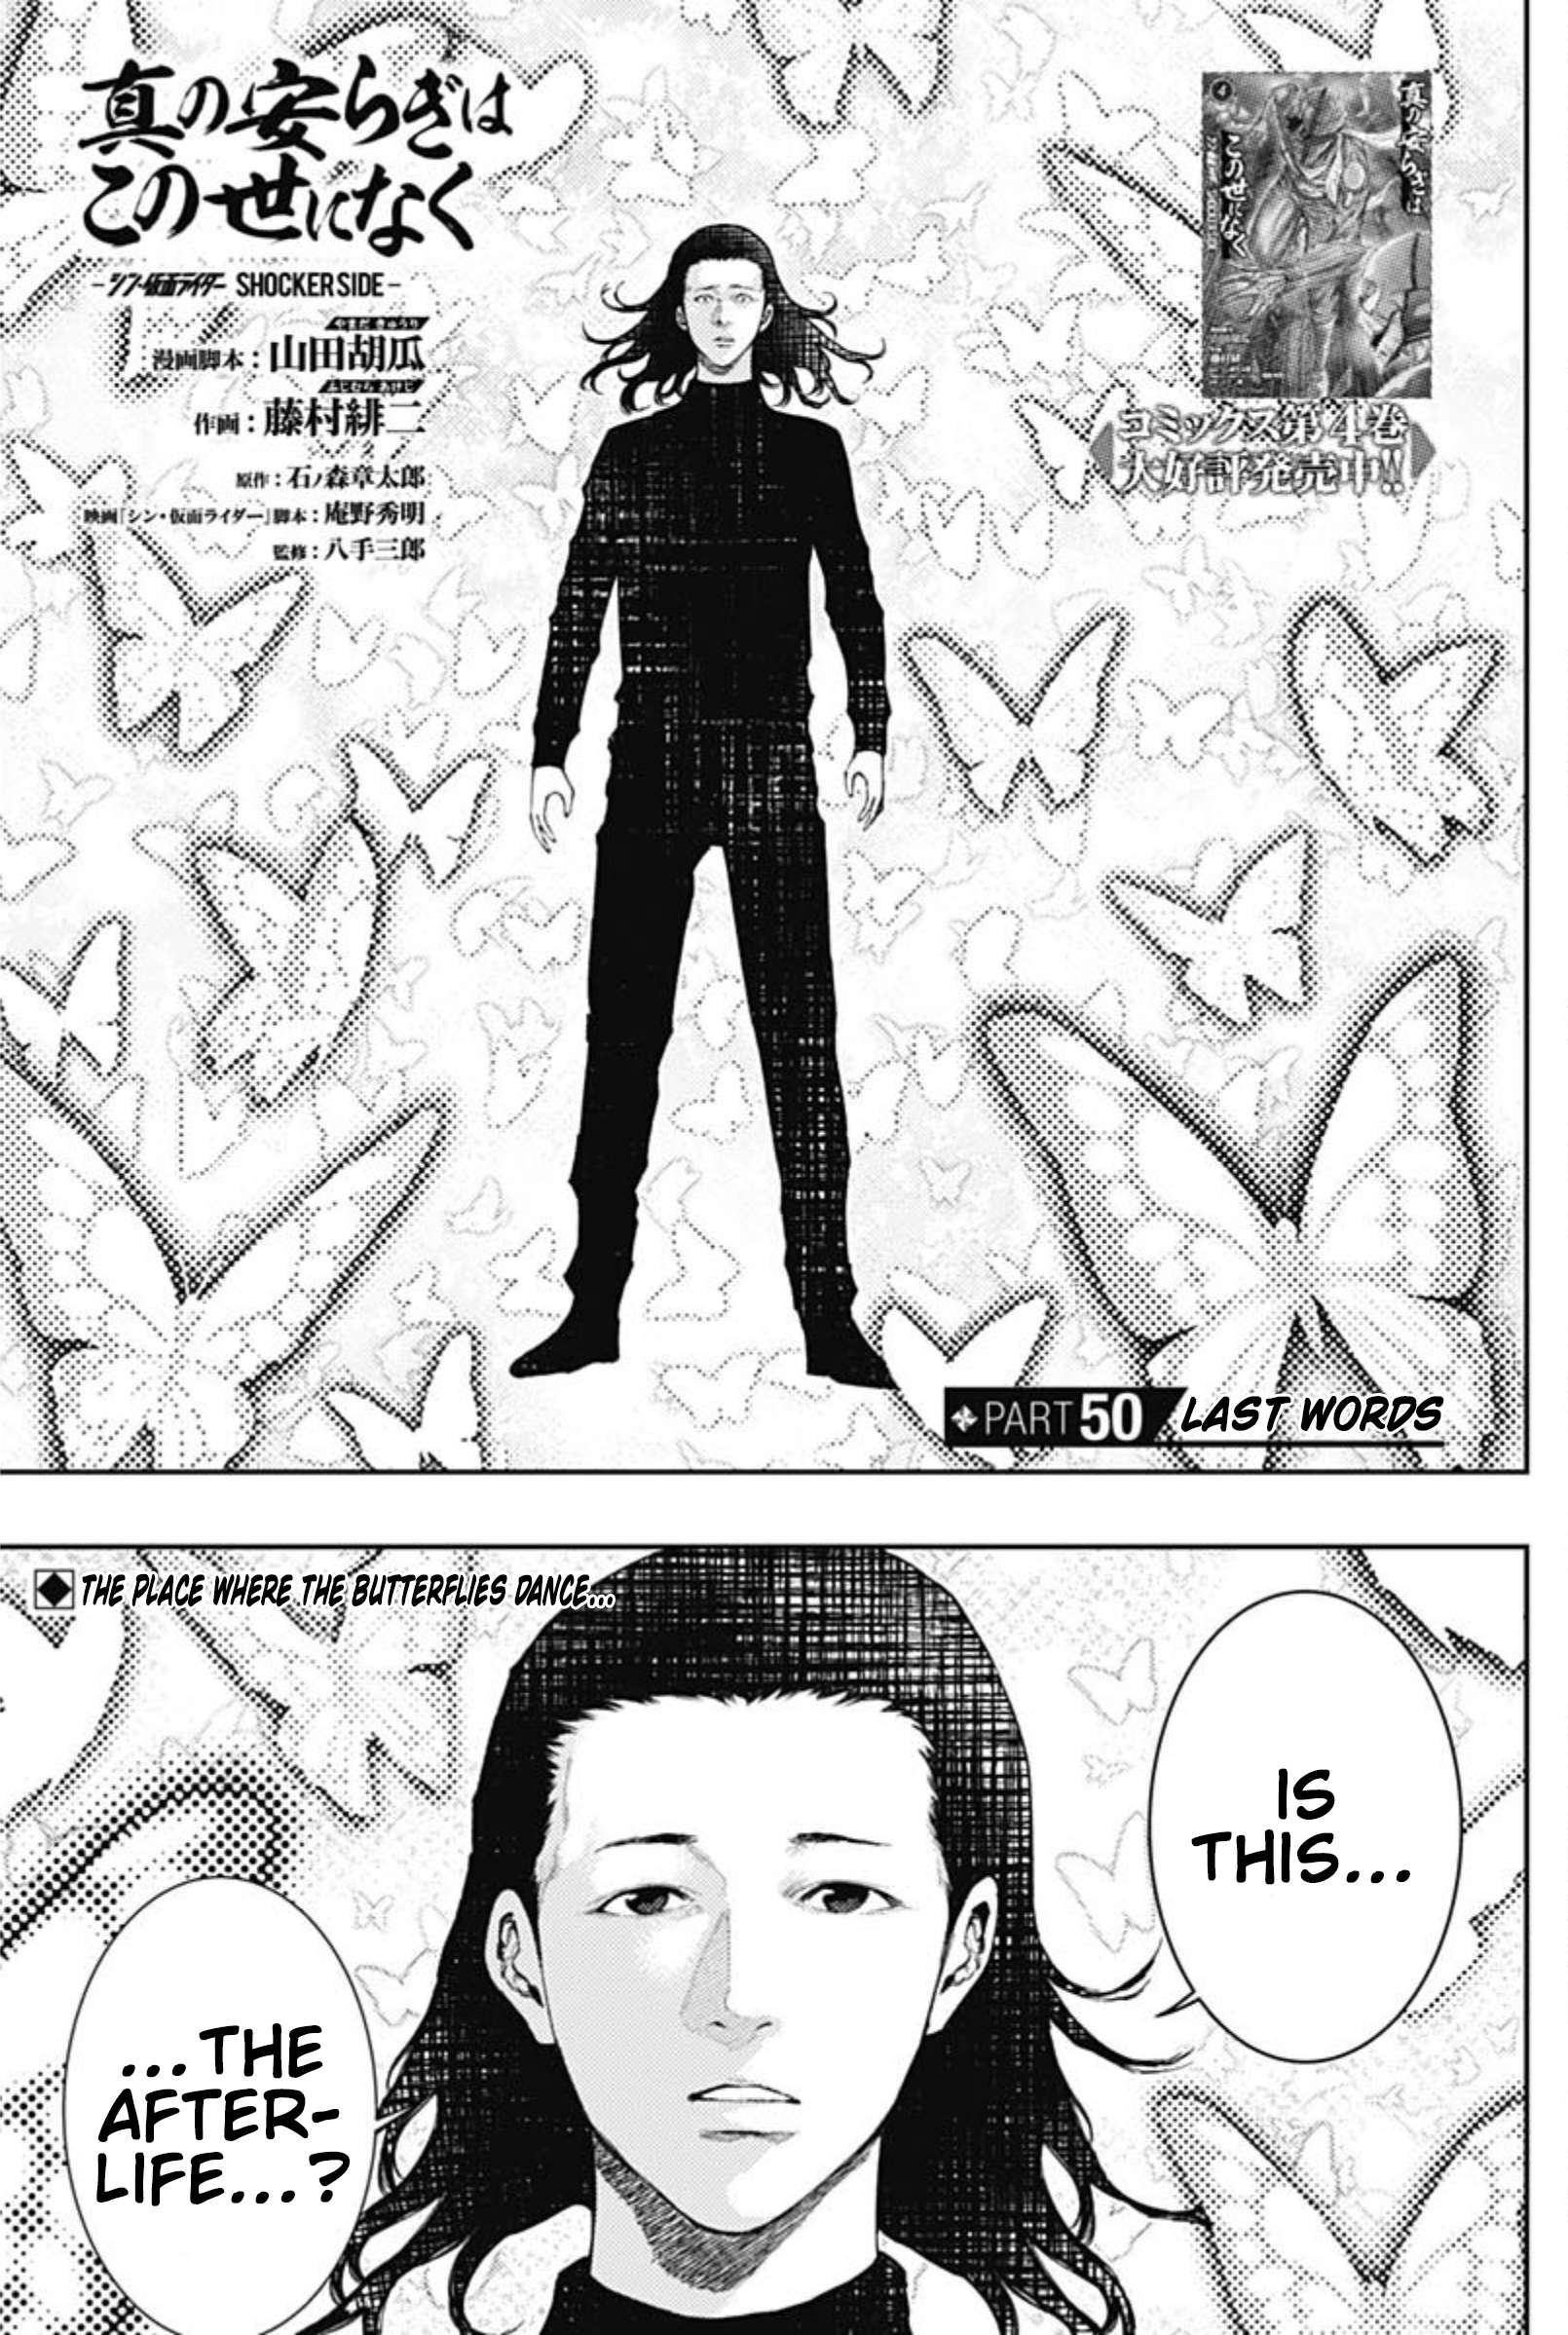 There is no true peace in this world -Shin Kamen Rider SHOCKER SIDE- - chapter 50 - #1